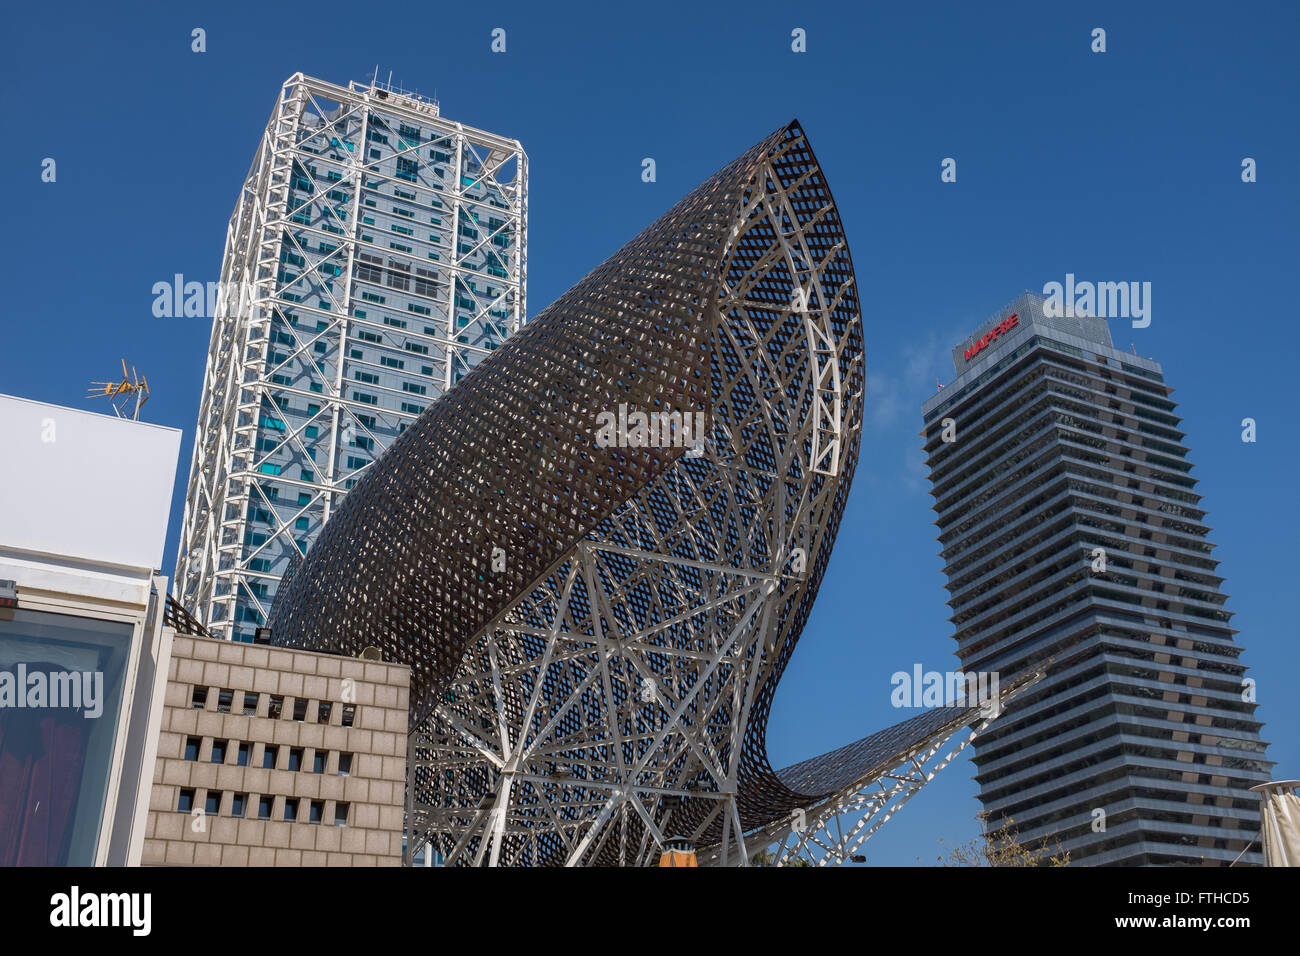 'El Peix' - The Fish, sculpture by Frank Gehry in Barceloneta, Barcelona Stock Photo